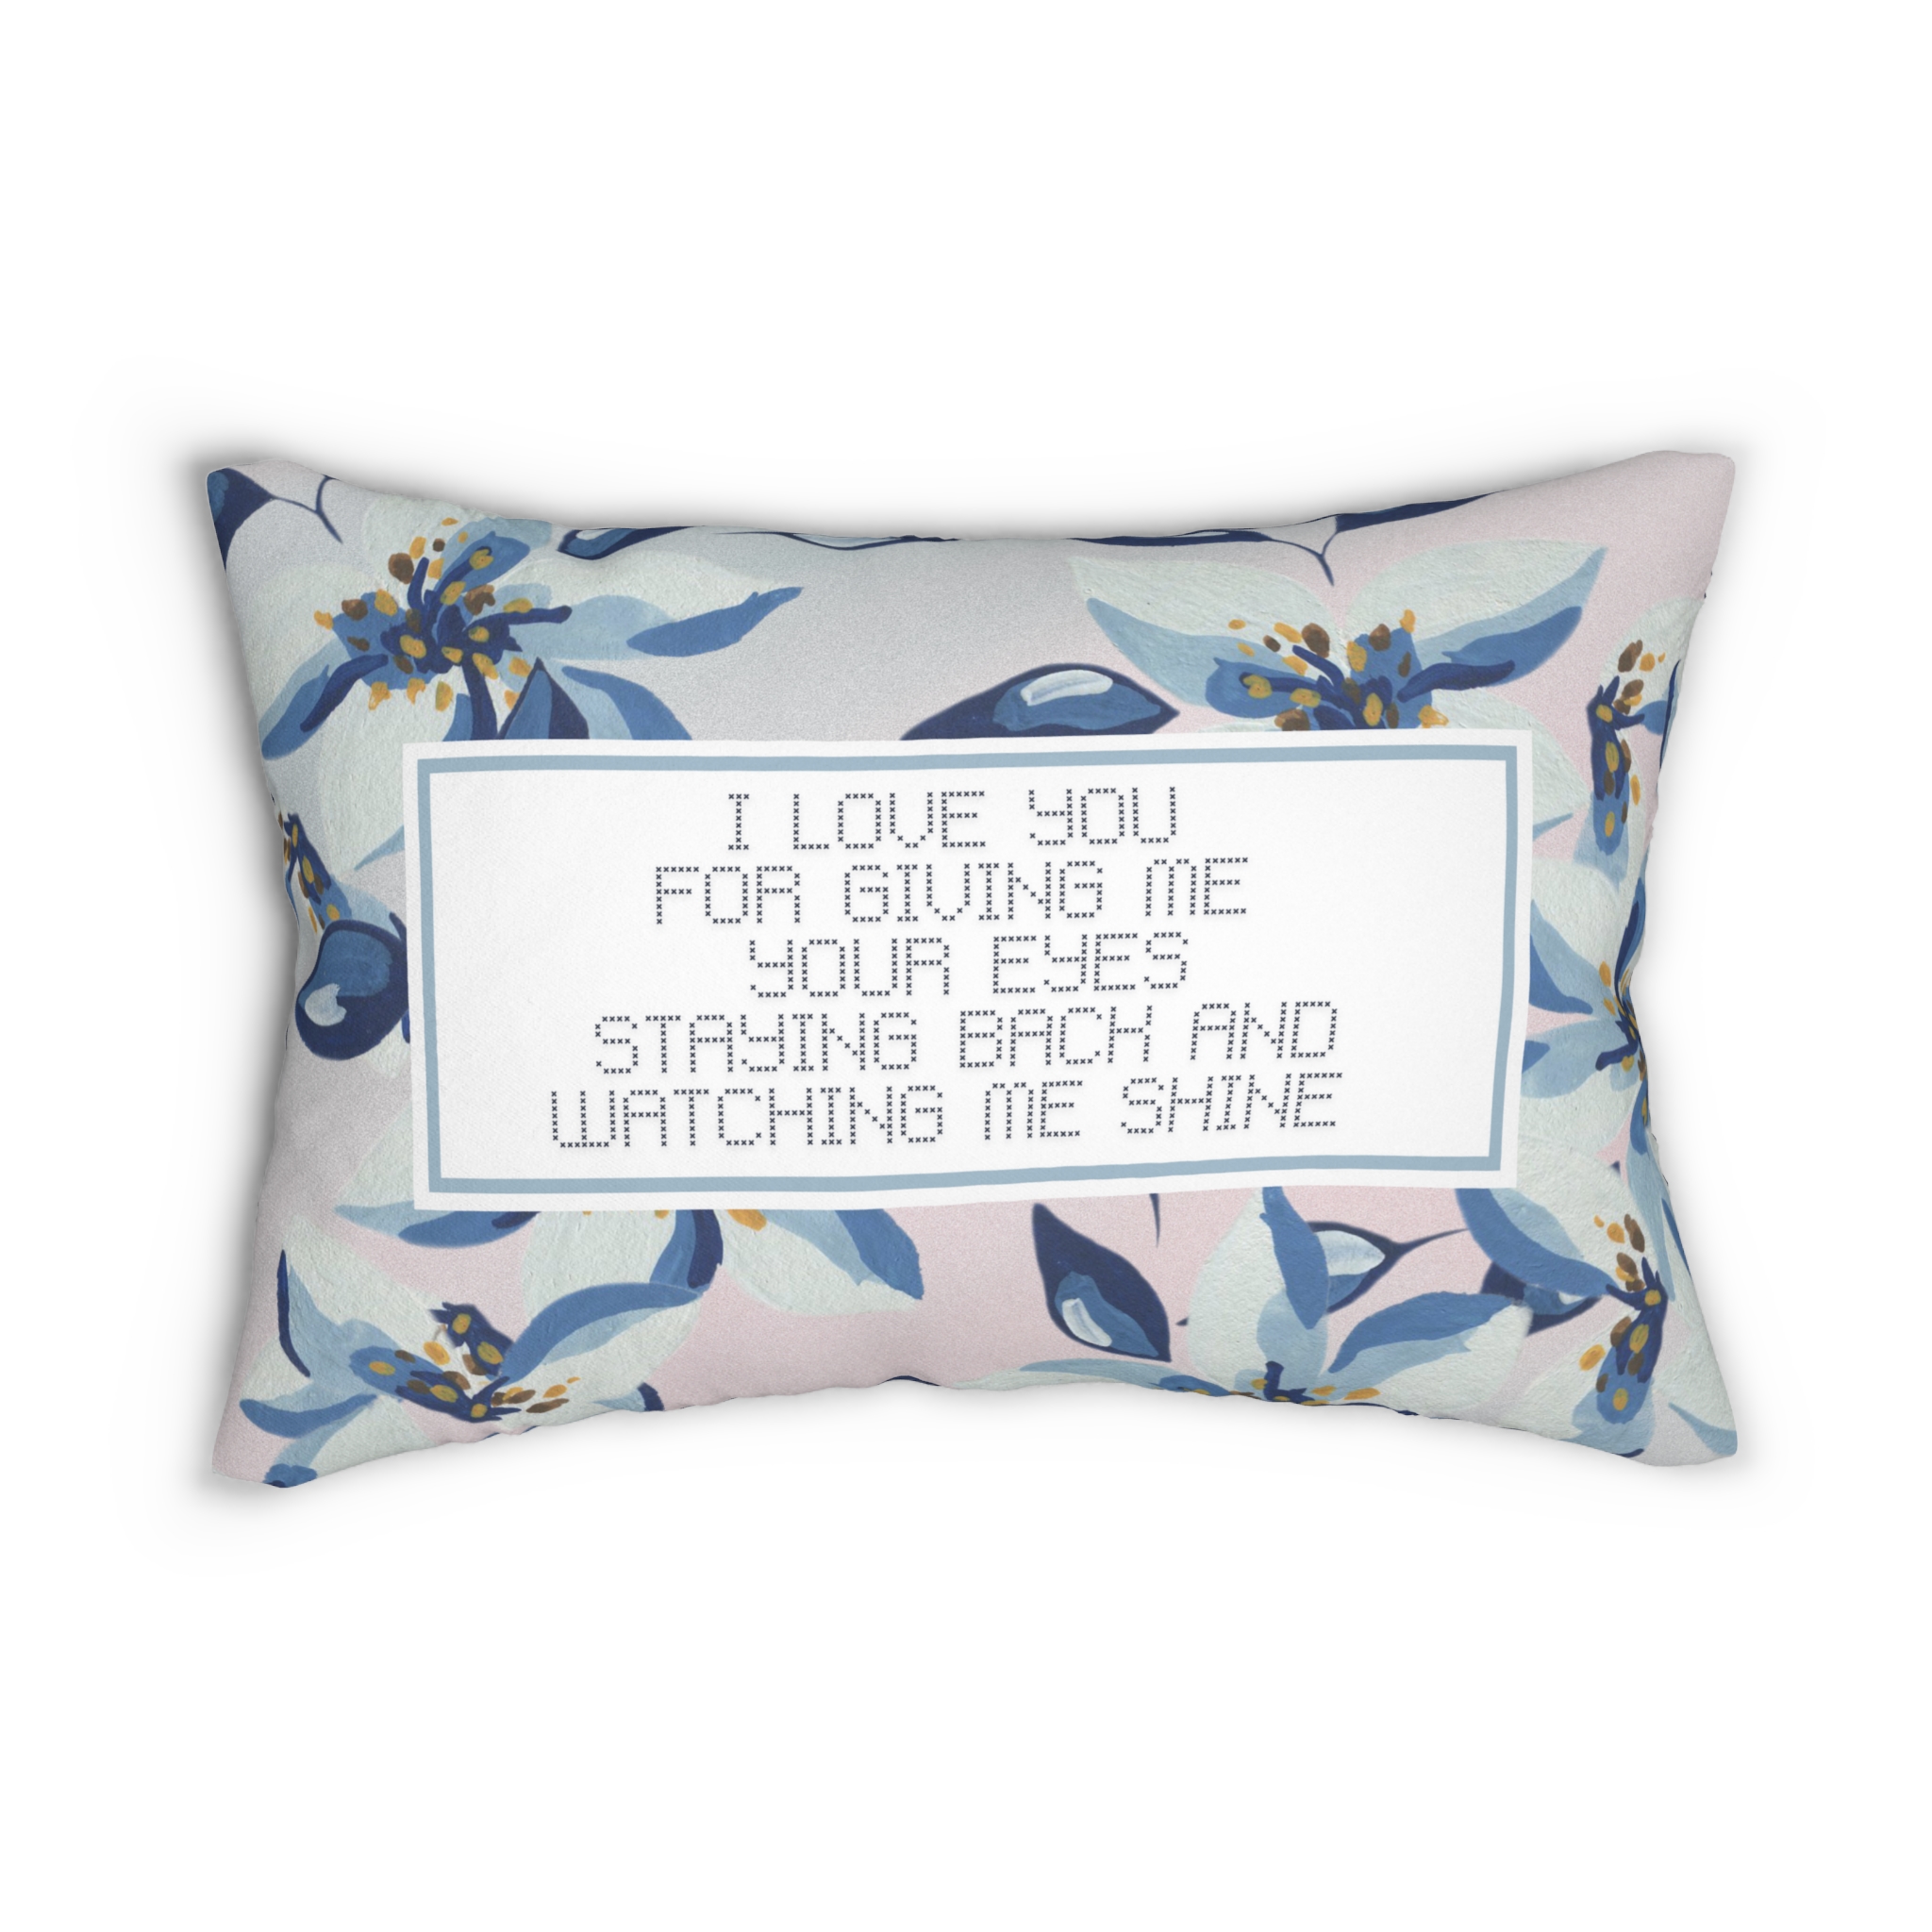 the best day taylor swift lyric pillow mothers day gift for swiftie moms